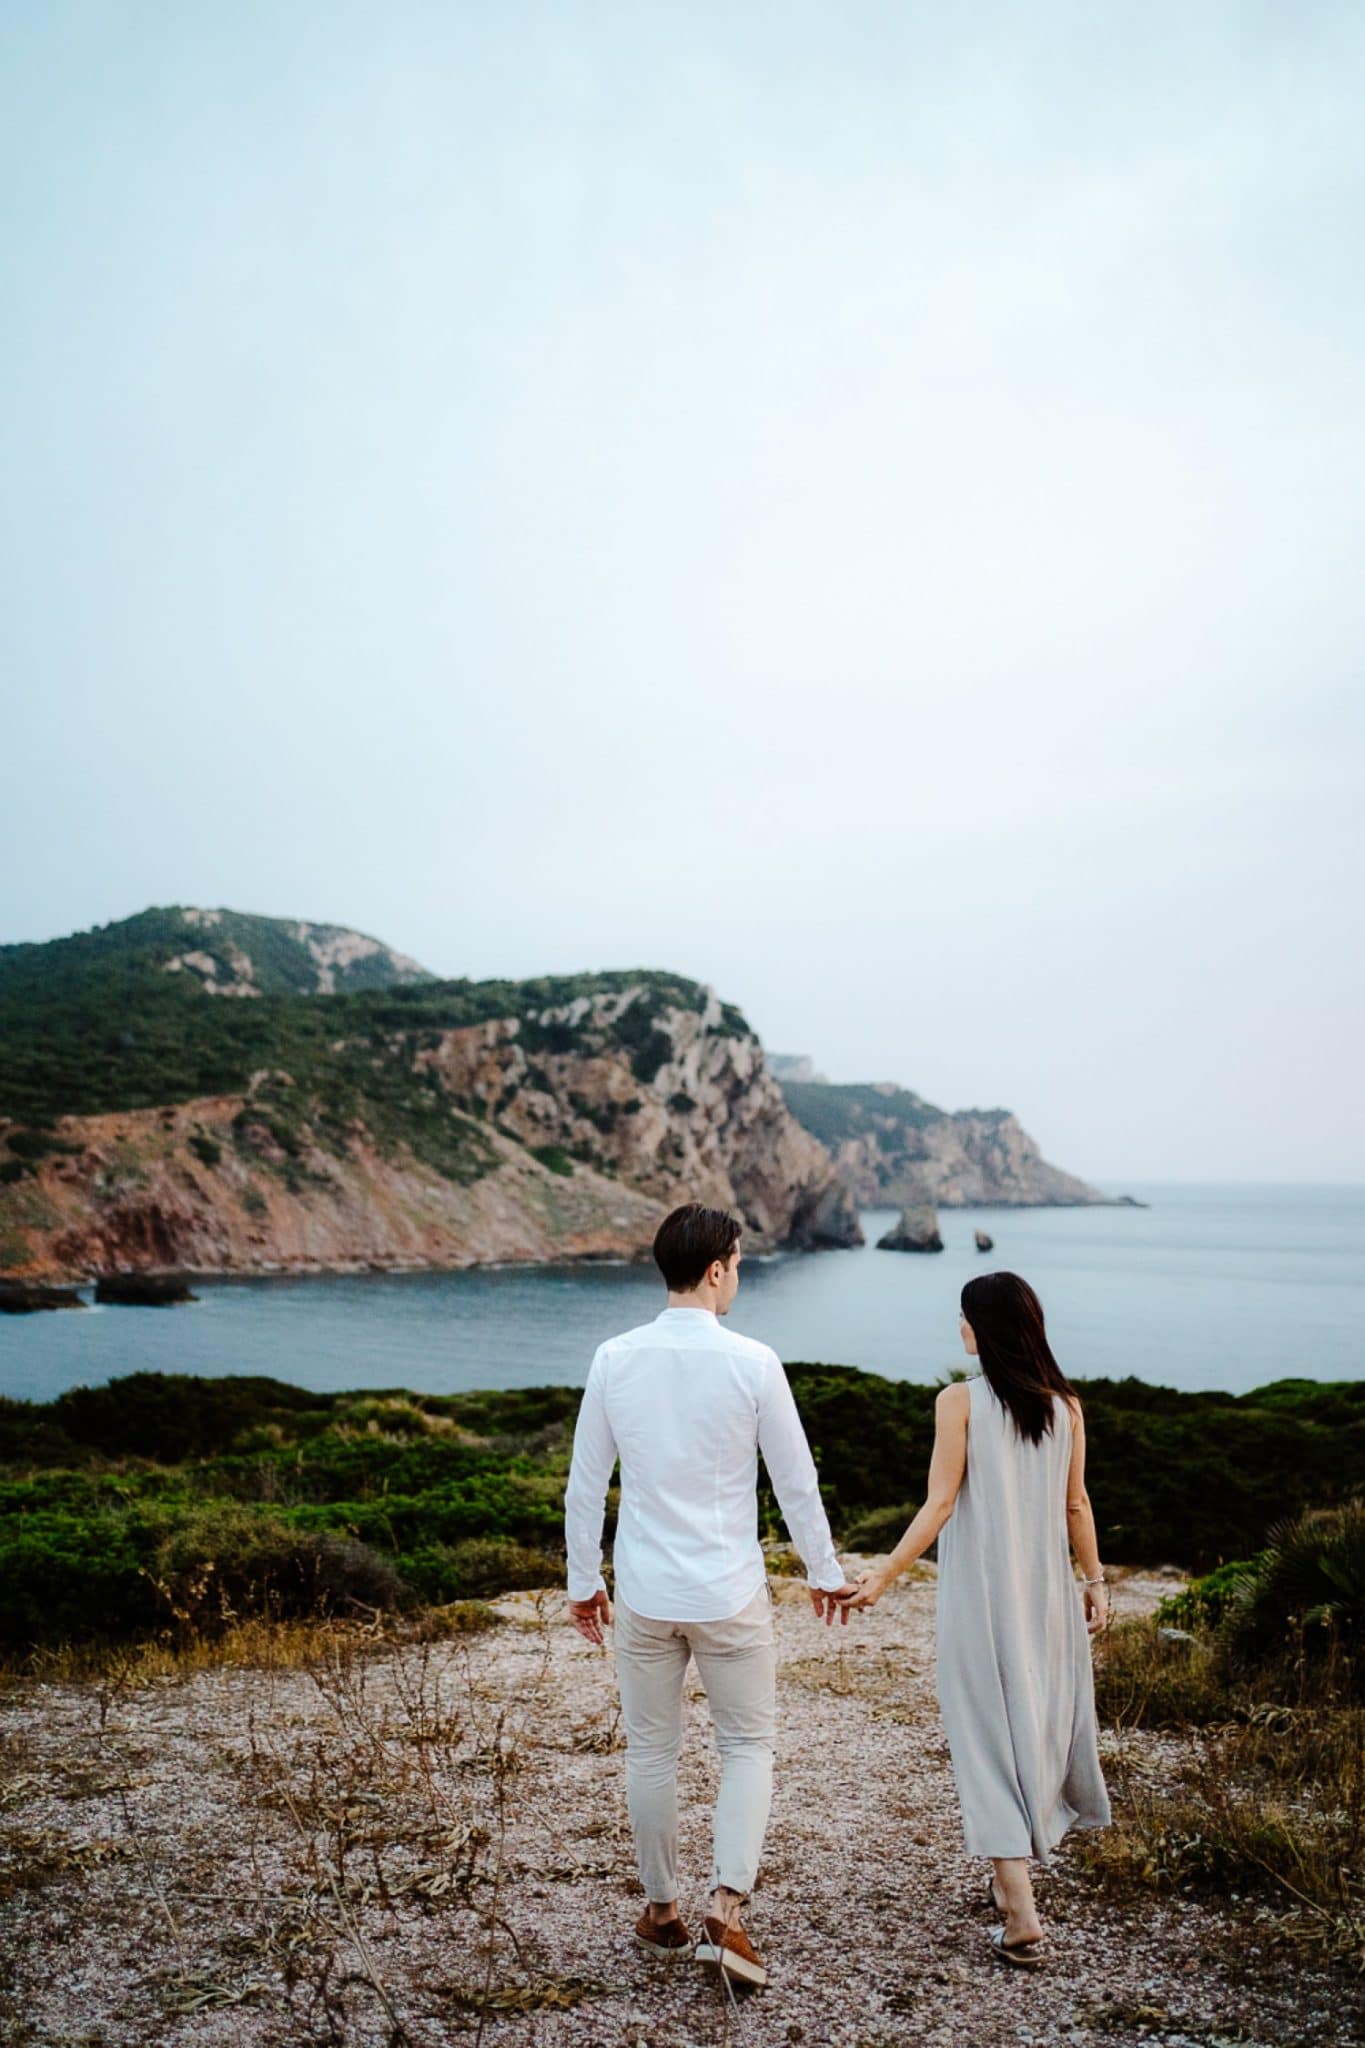 Couple standing on a rocky cliff overlooking the sea in Alghero, photographed by Valeria Mameli